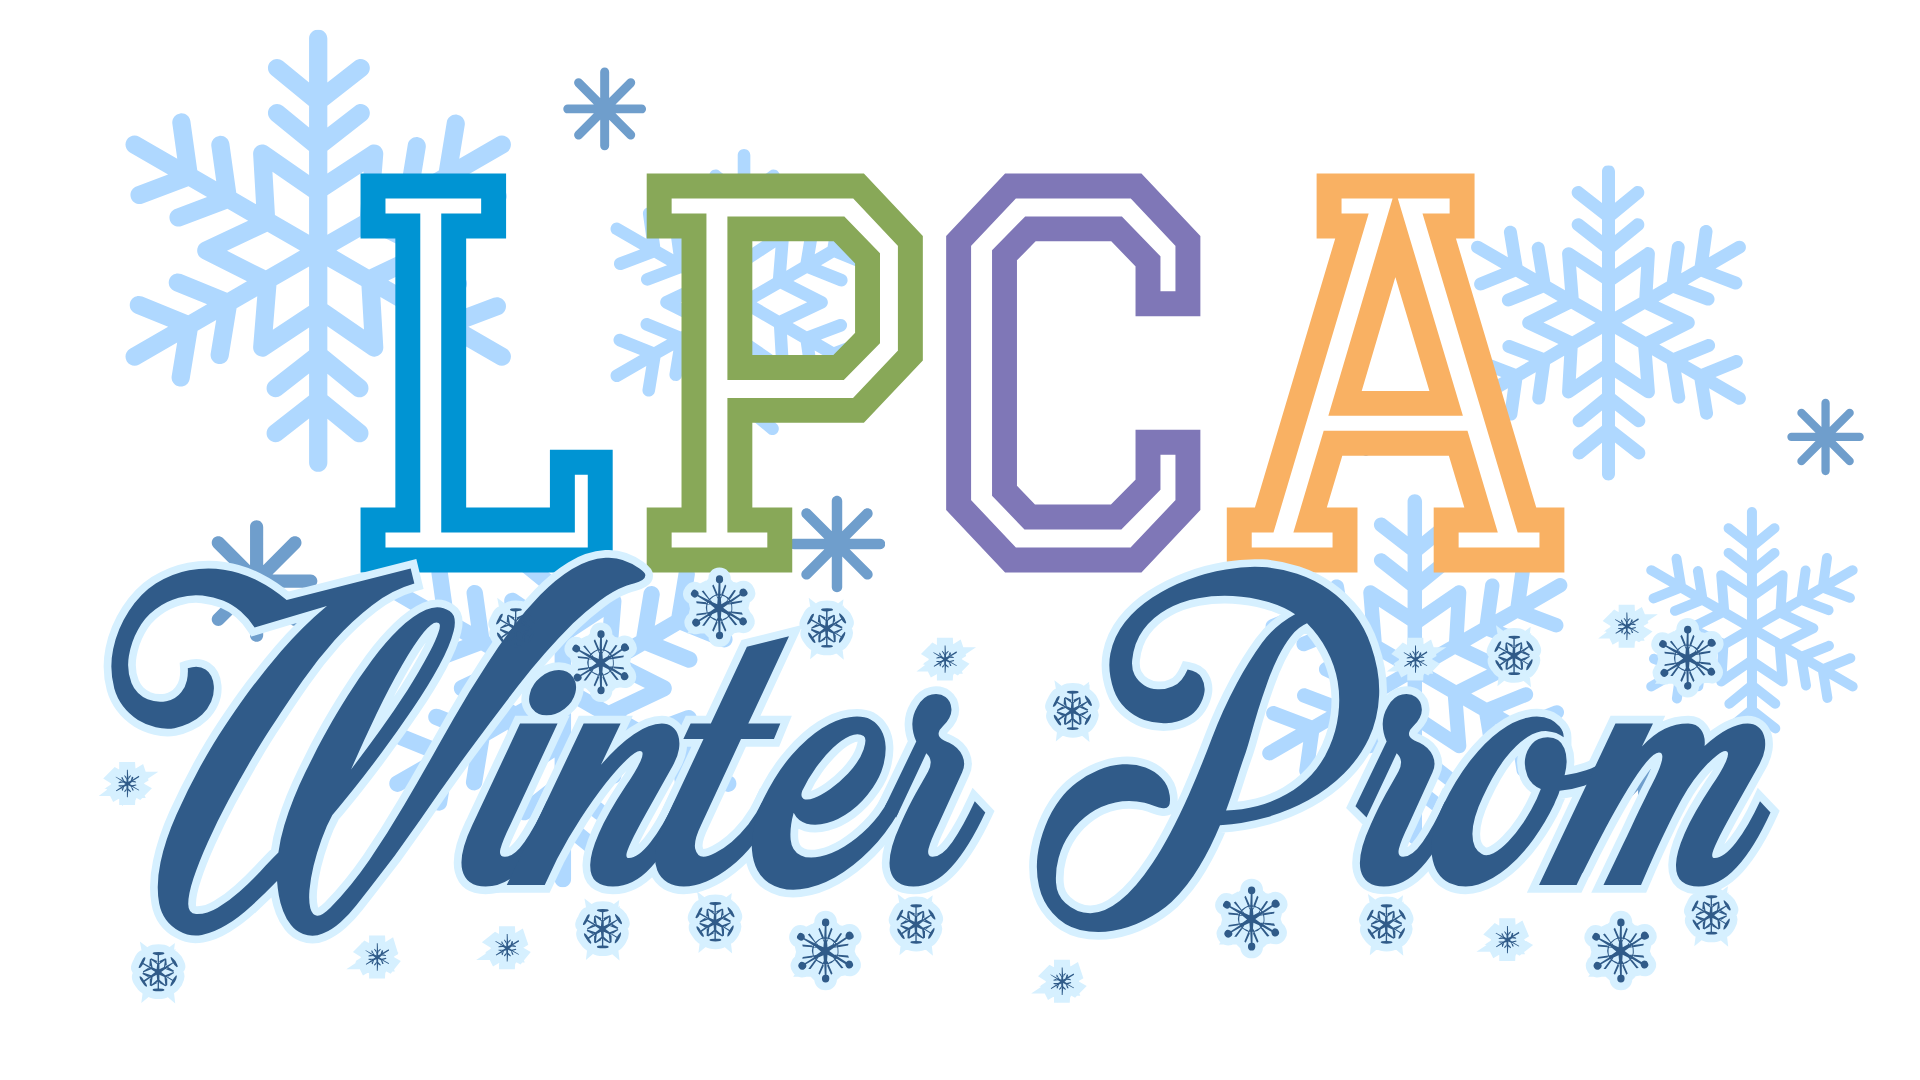 LPCA Winter Prom title treatment with snowflakes